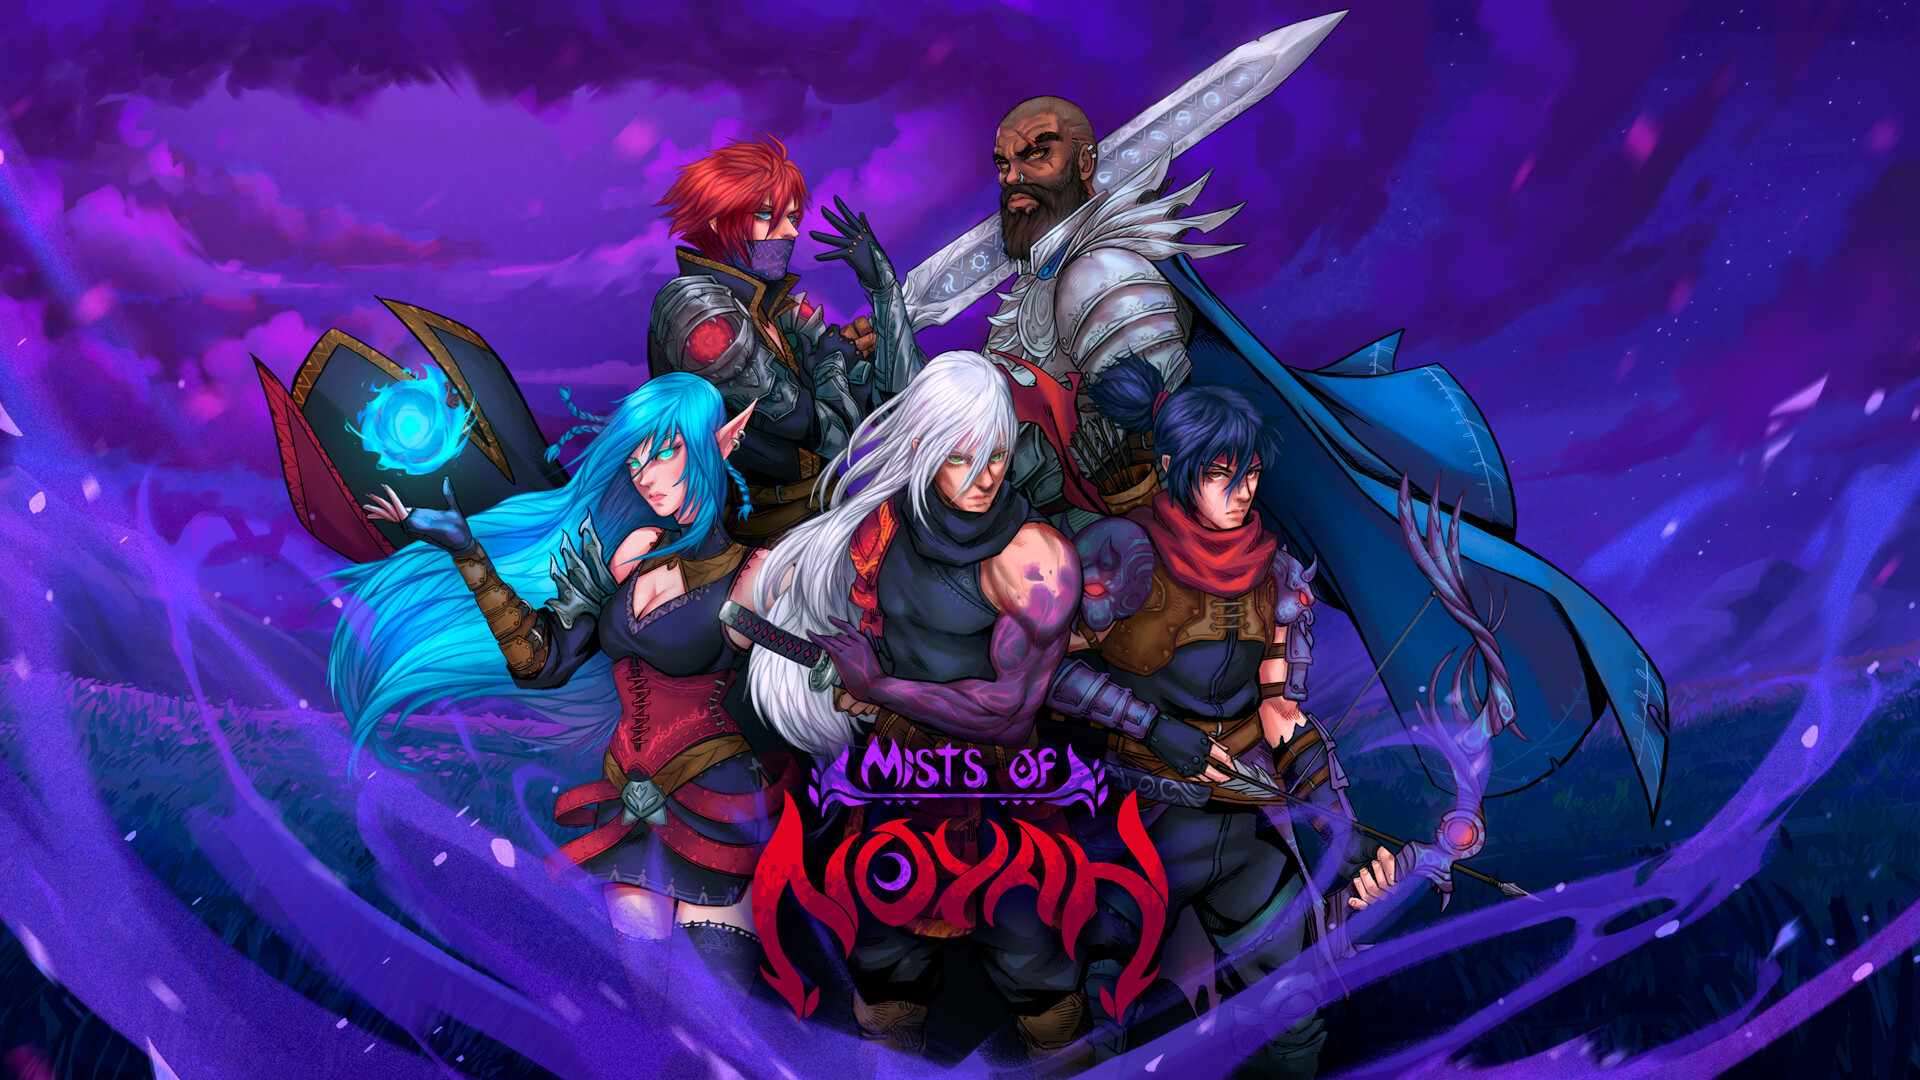 Promo art I made for Mists of Noyah, a Pixel art Action RPG with Co-op and ...